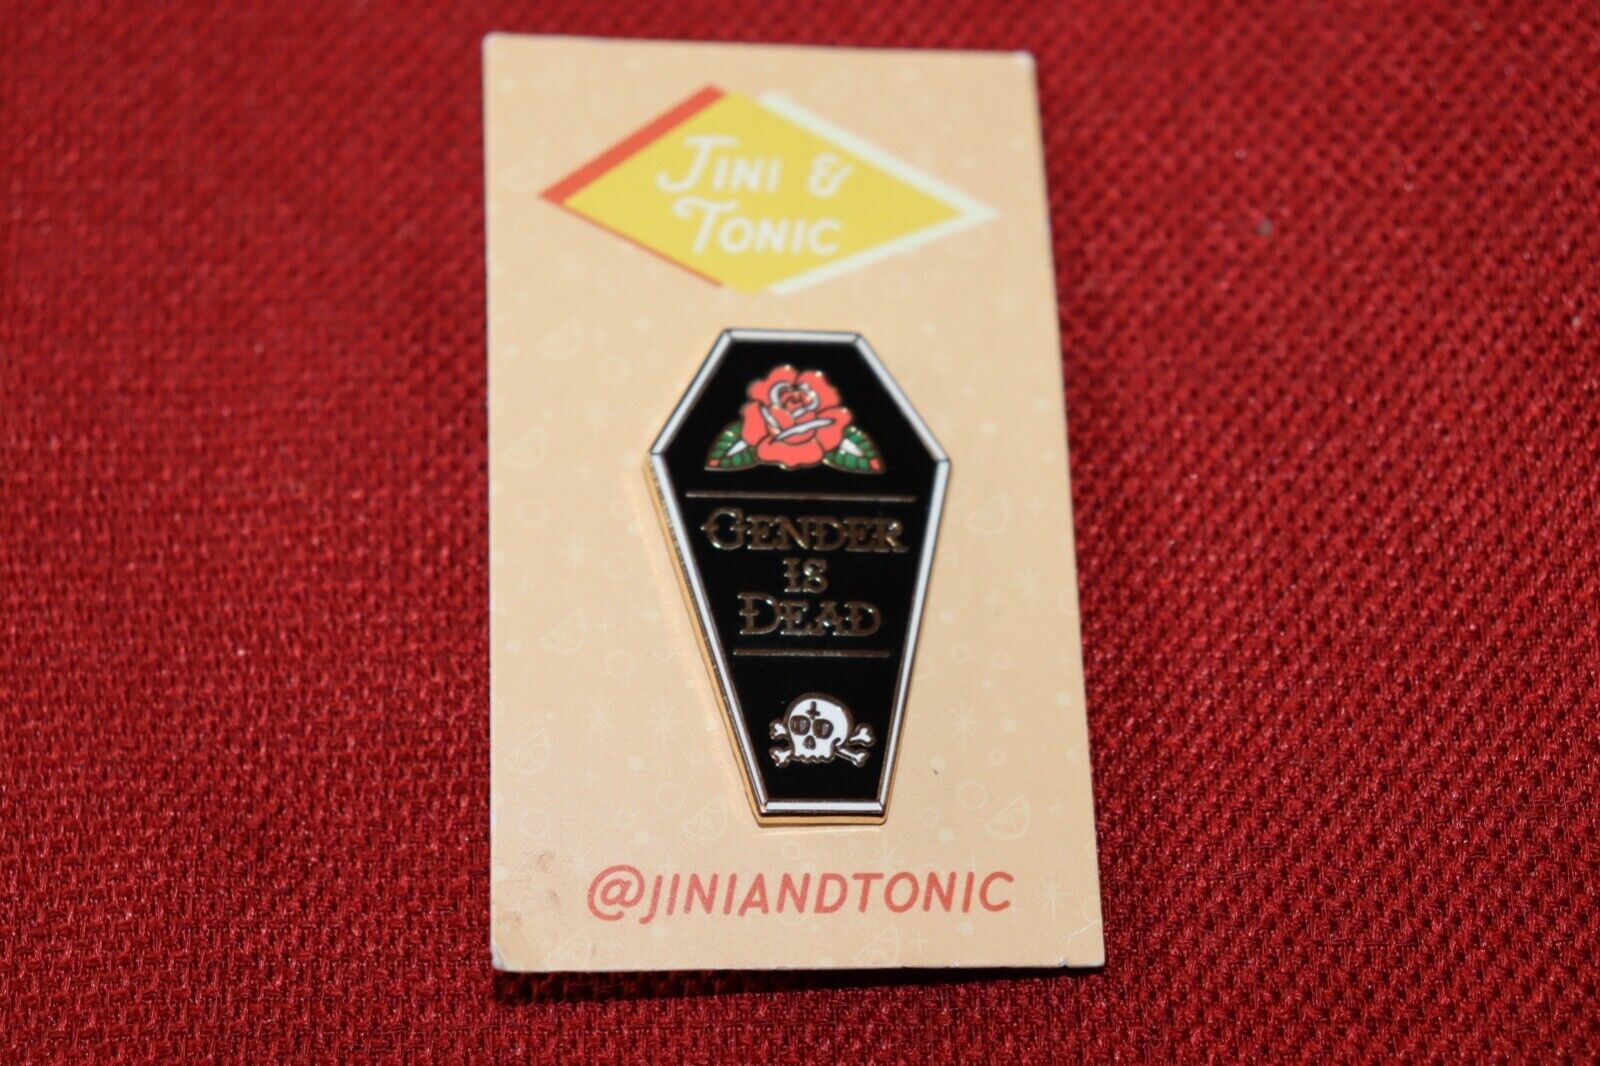 Gender is Dead A-gender Jini & Tonic Enamel Pin Limited Edition Button Badge